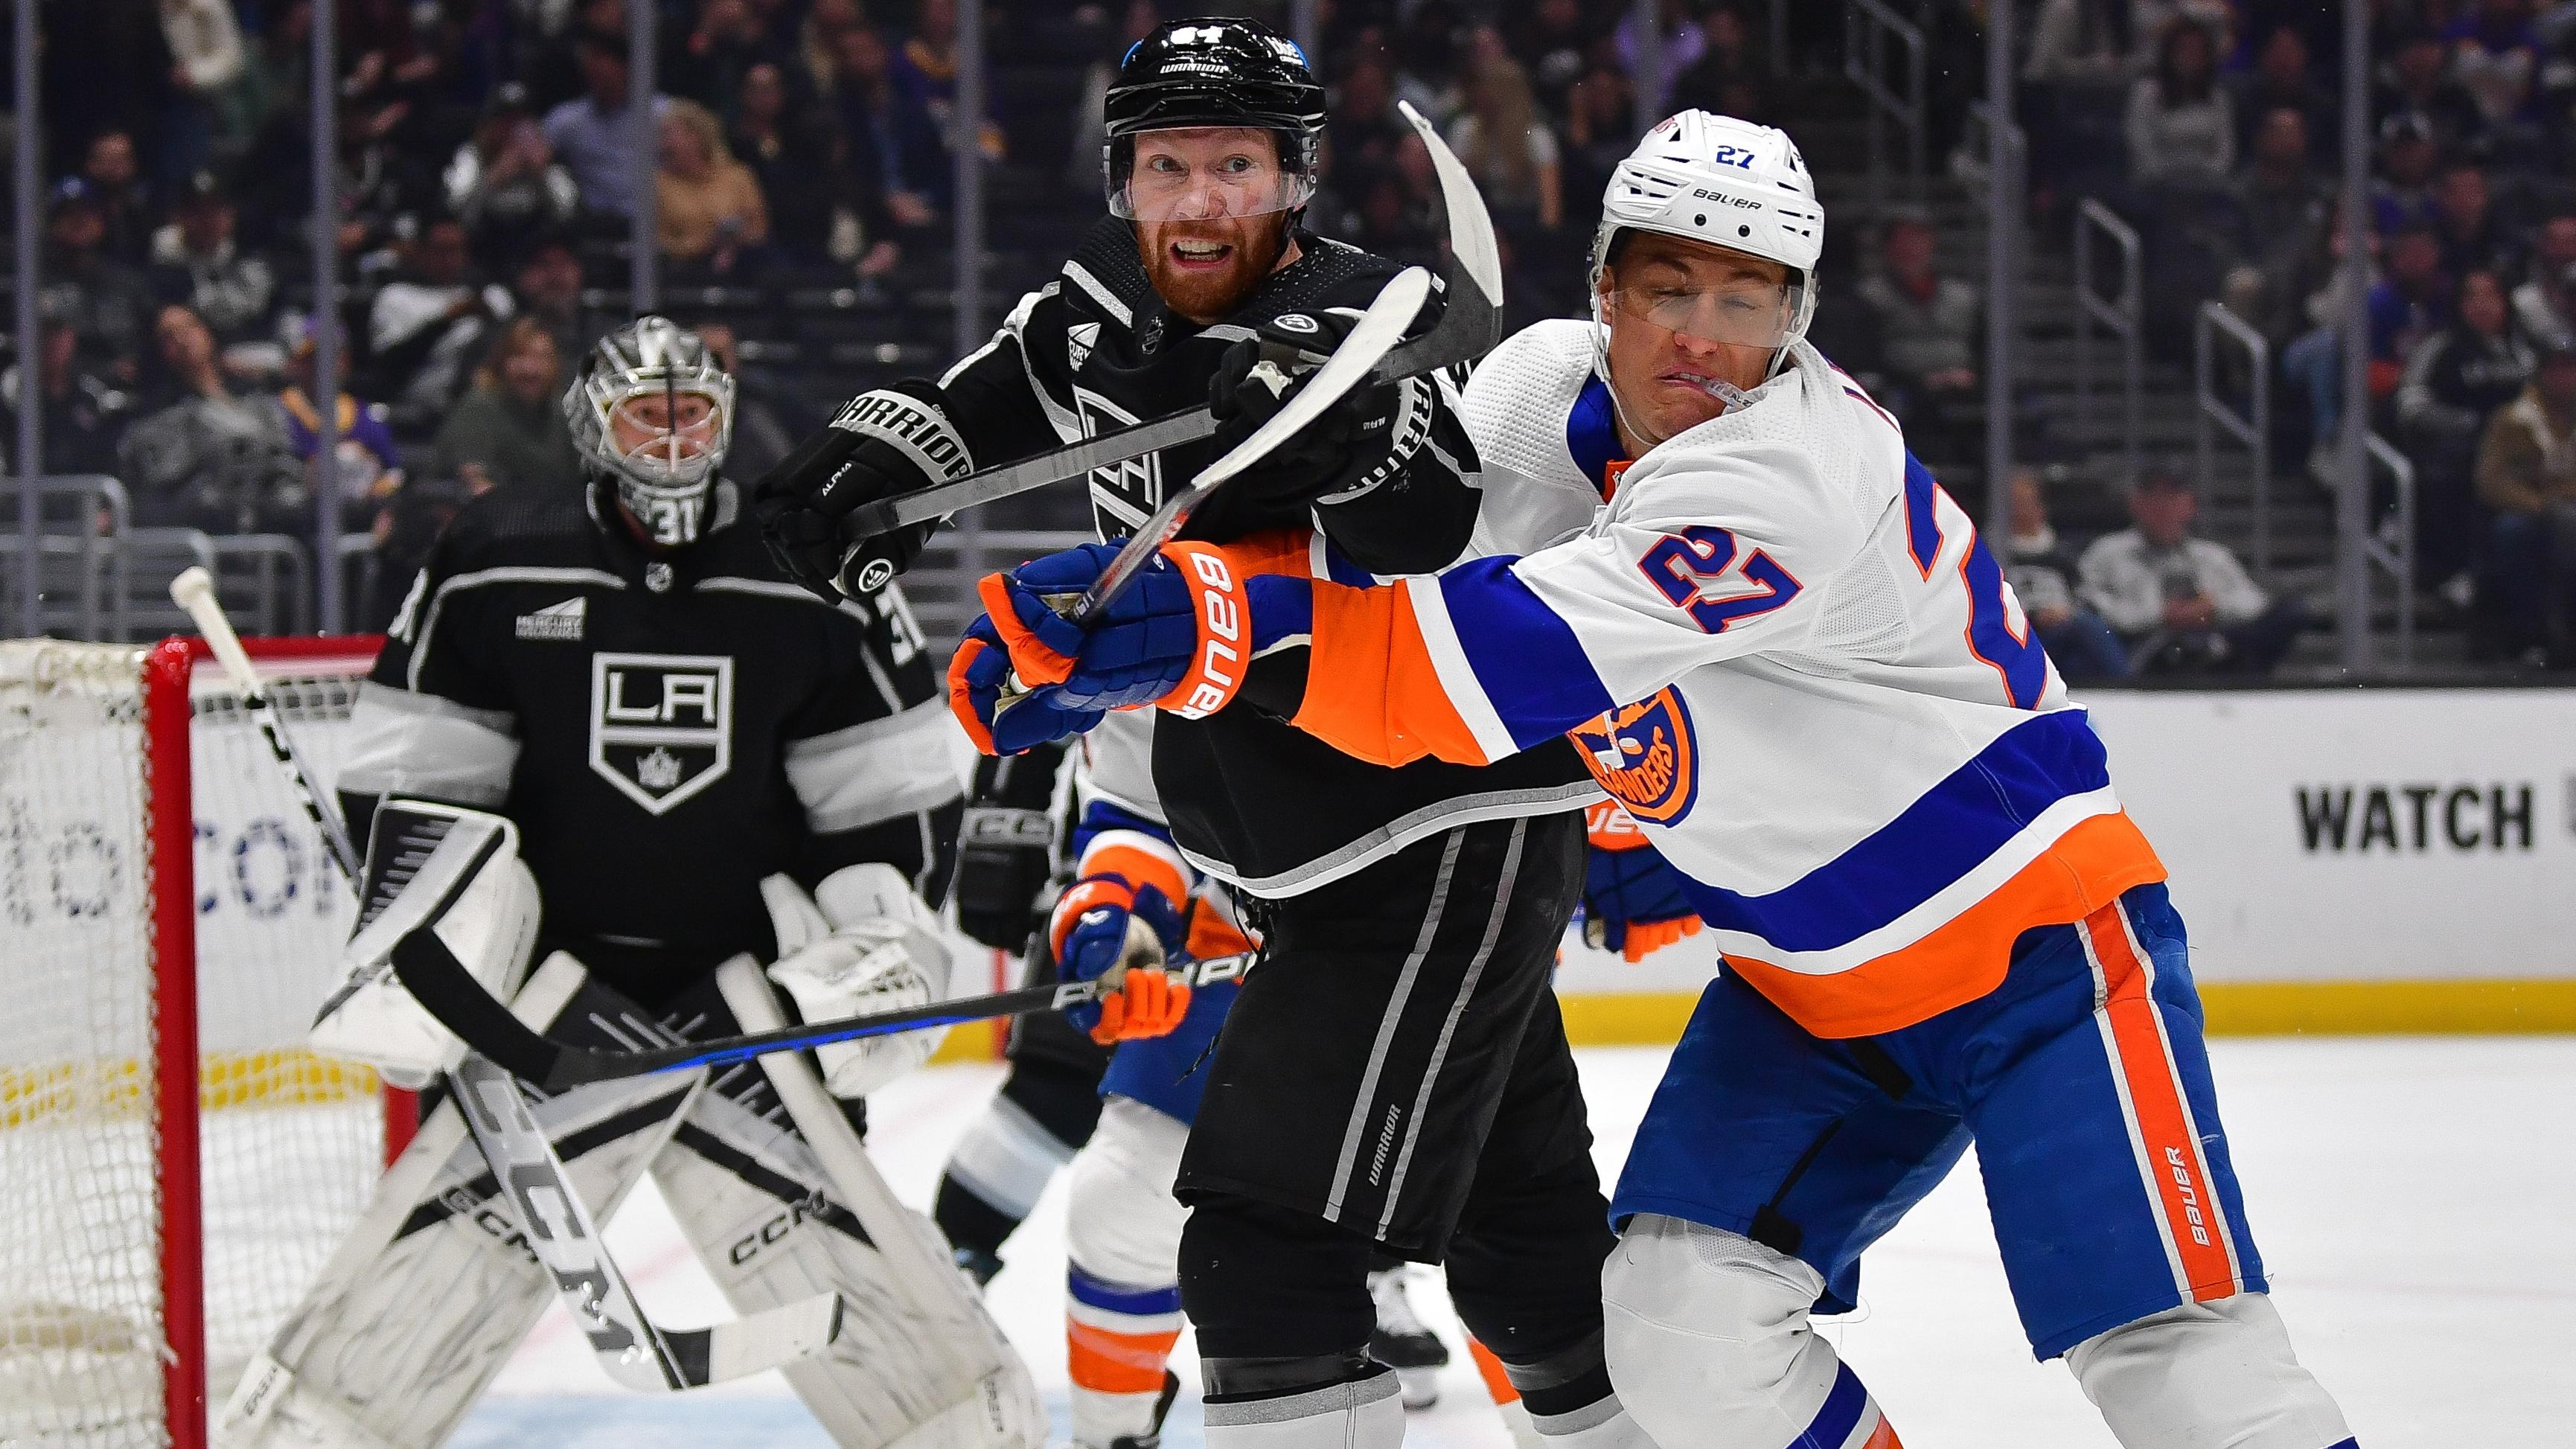 Los Angeles Kings defenseman Vladislav Gavrikov (84) plays for the puck against New York Islanders left wing Anders Lee (27) during the first period at Crypto.com Arena / Gary A. Vasquez - USA TODAY Sports